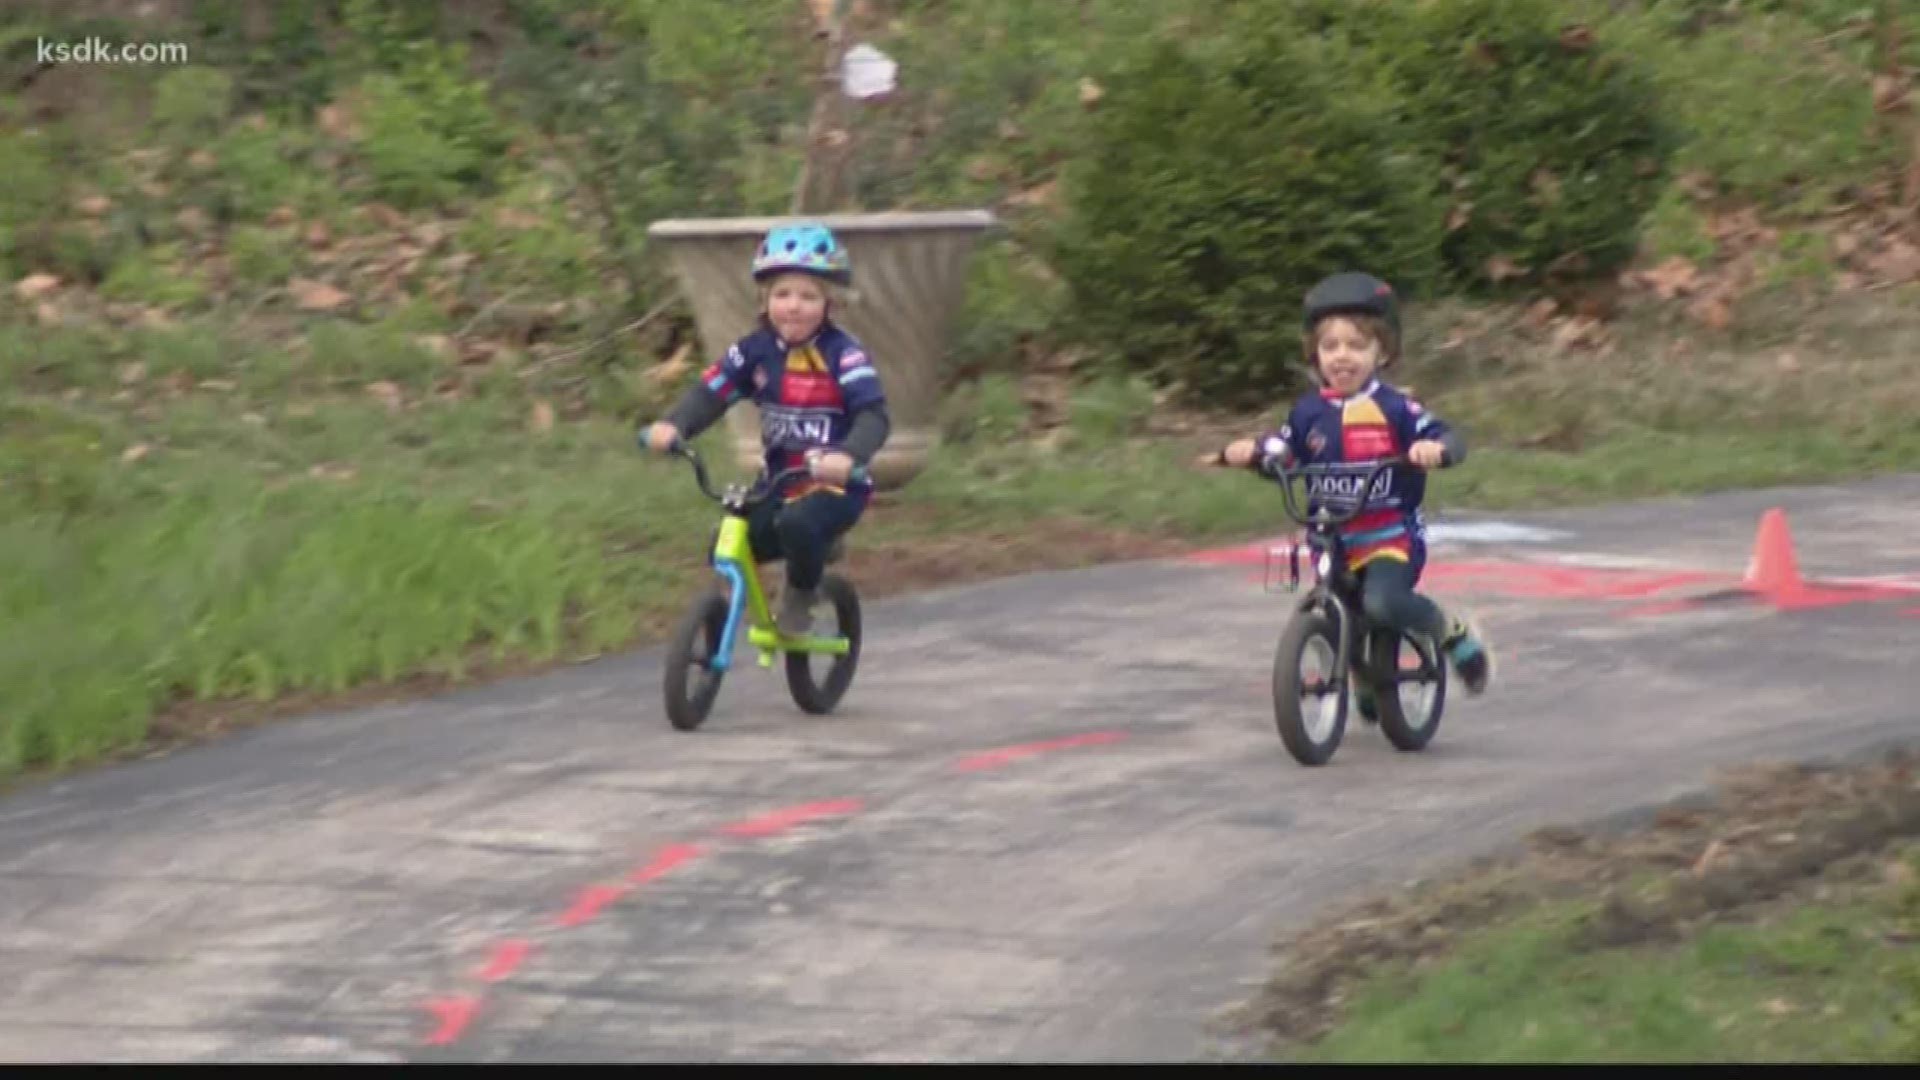 These young daredevils have turned their daily races into the big thing in the neighborhood